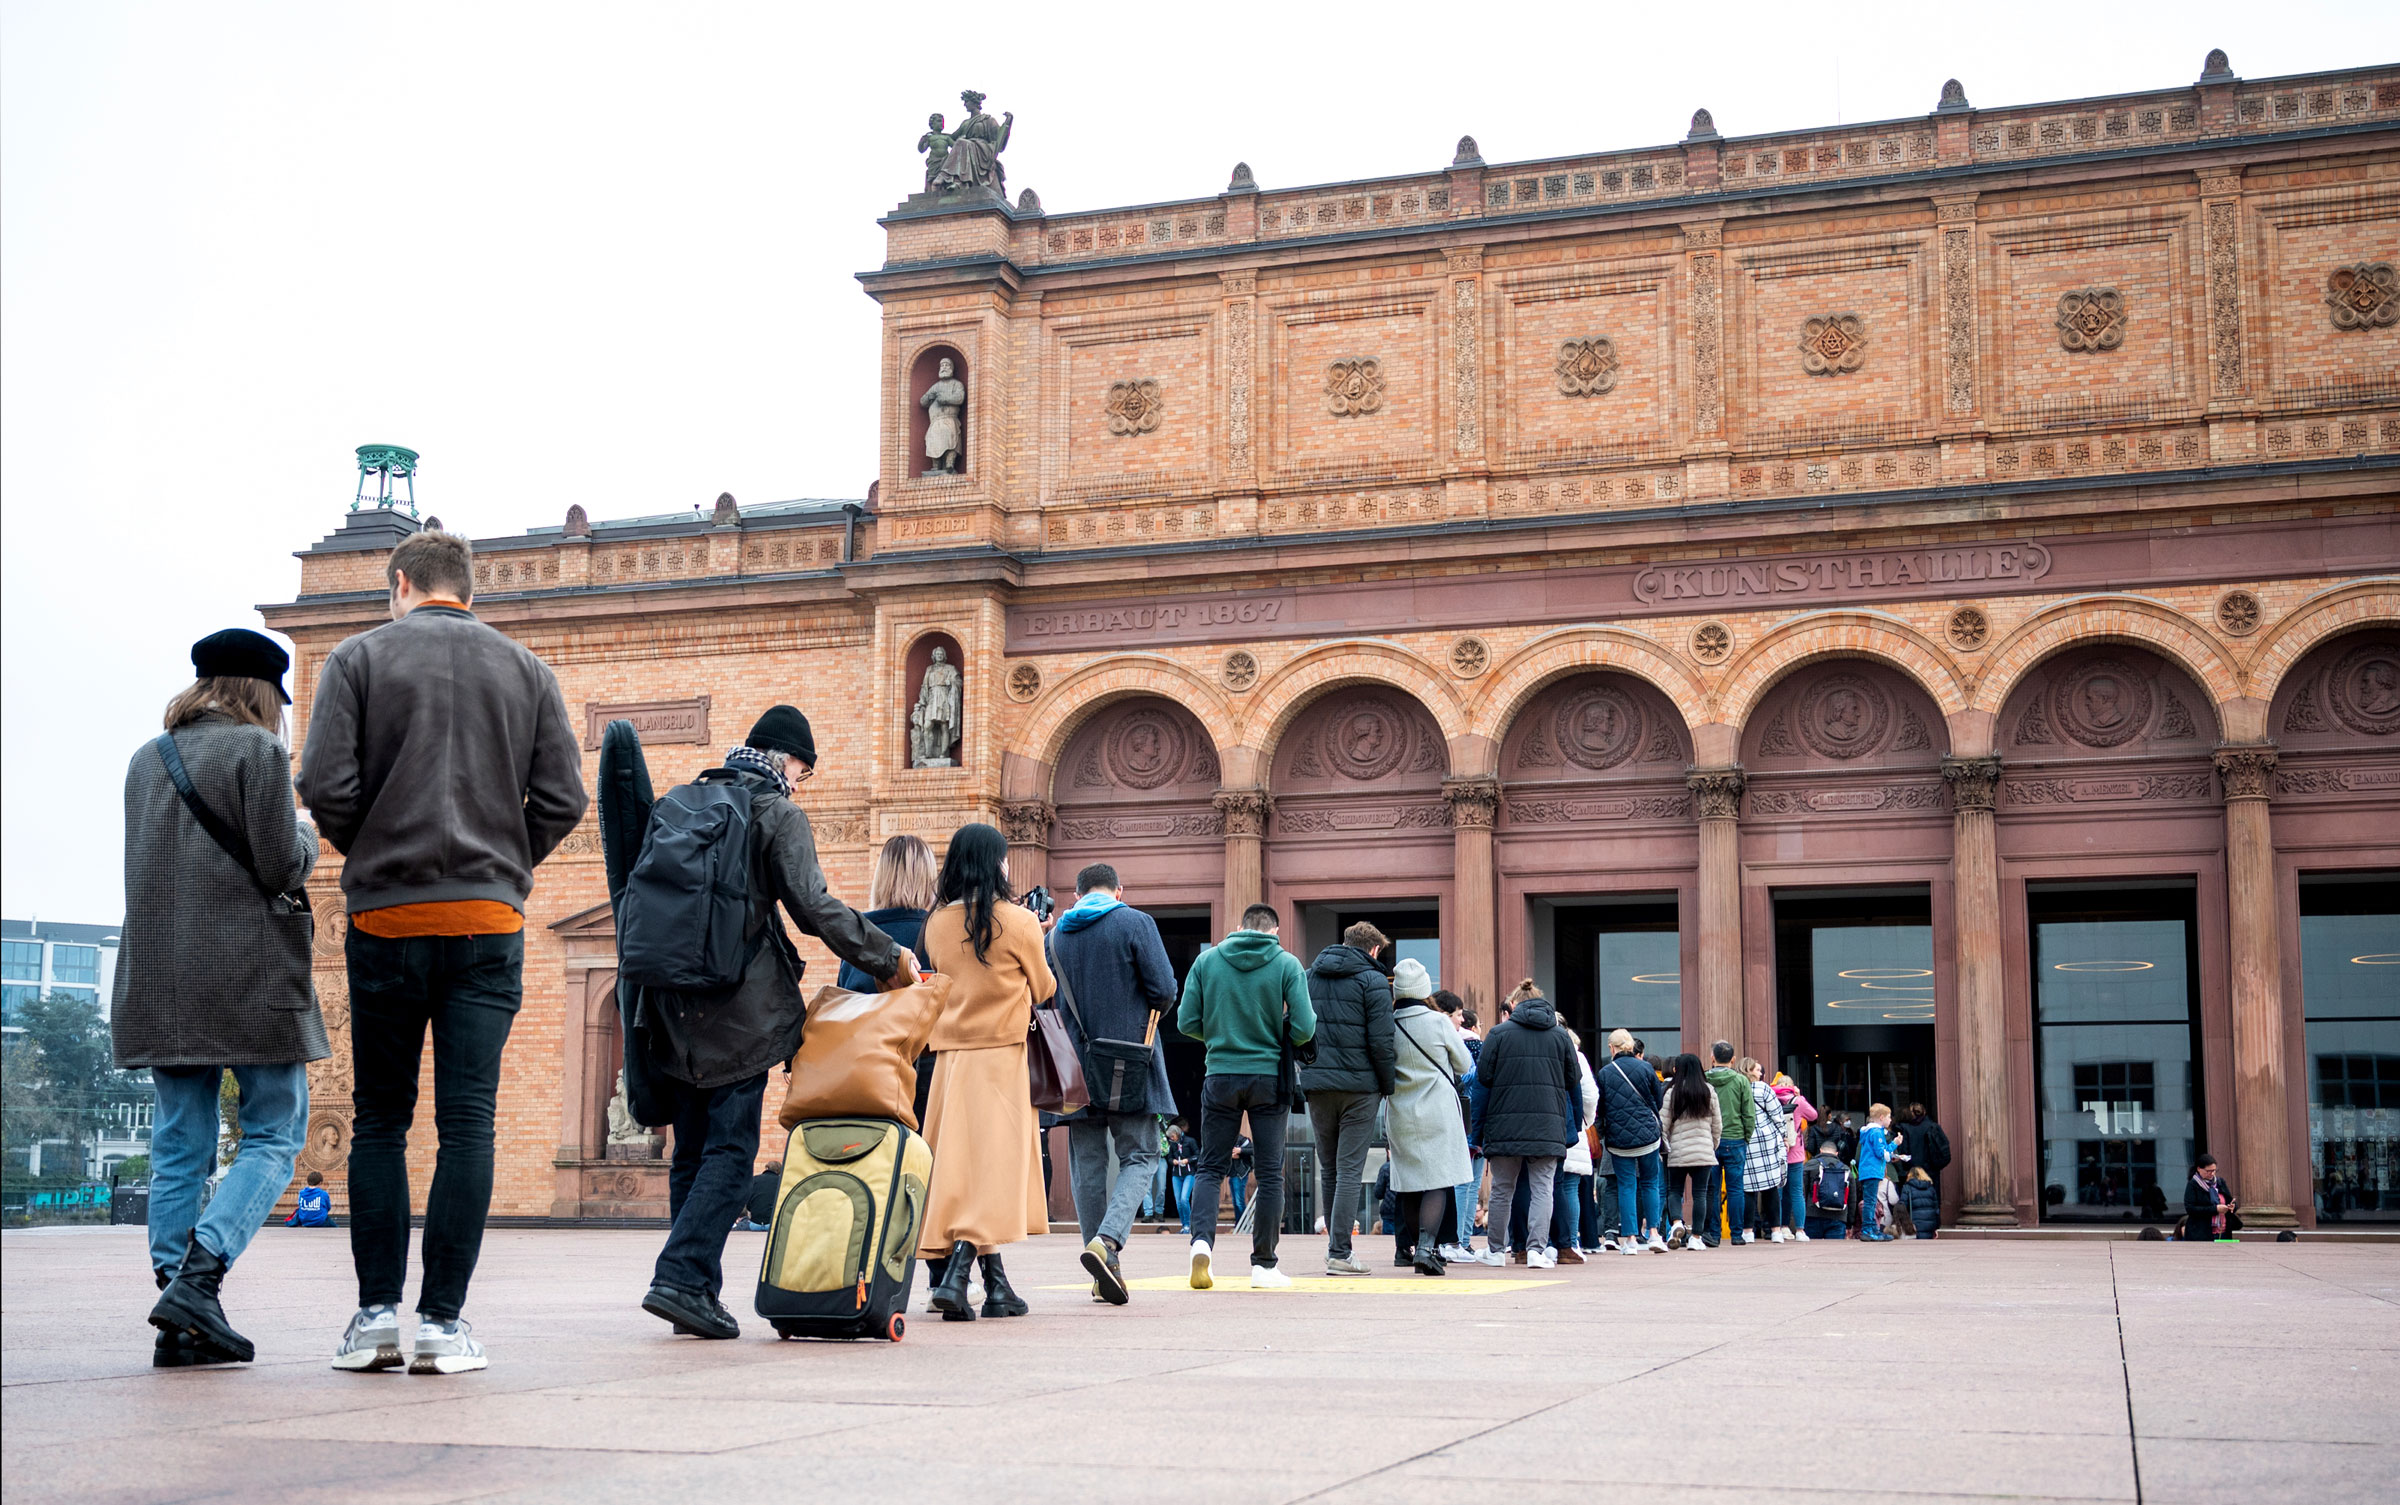 Visitors stand in line in front of the Kunsthalle, in Hamburg, Germany, on Oct. 31, 2022. (Daniel Bockwoldt—picture-alliance/dpa/AP)